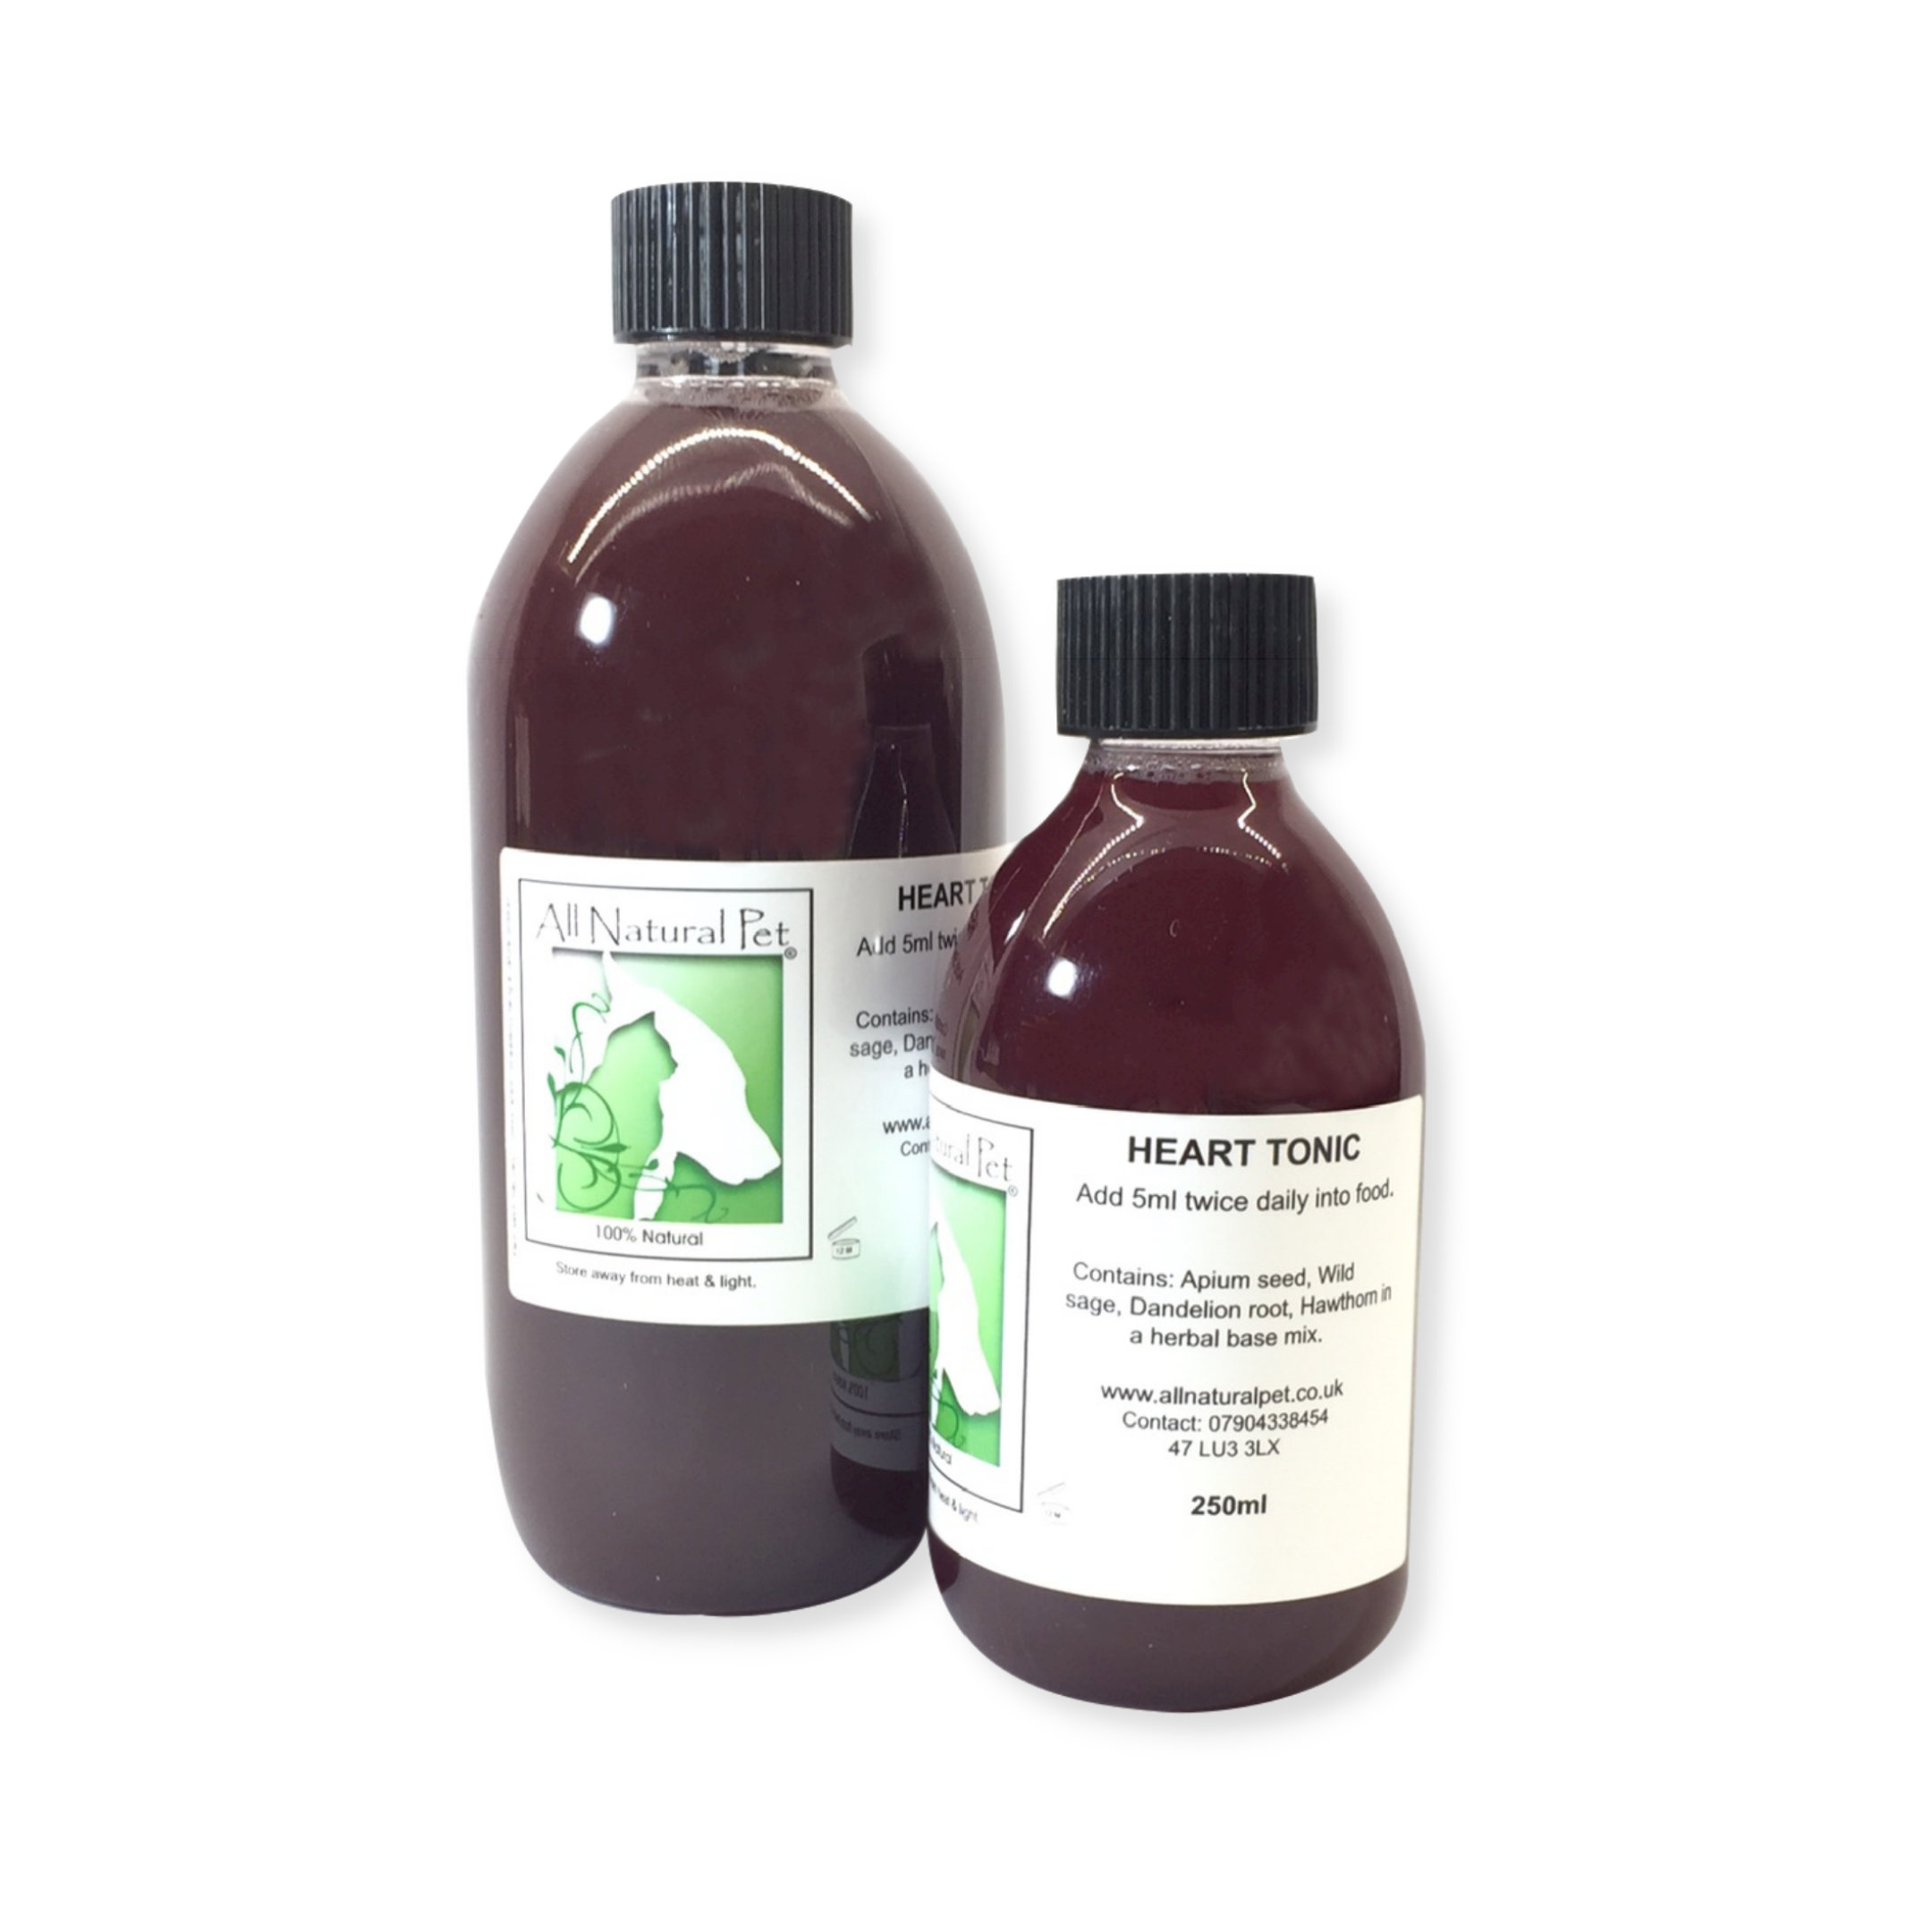 A couple of medium size bottles with black ribbed lids, and a white and green label contain a burgundy coloured herbal liquid for heart problems